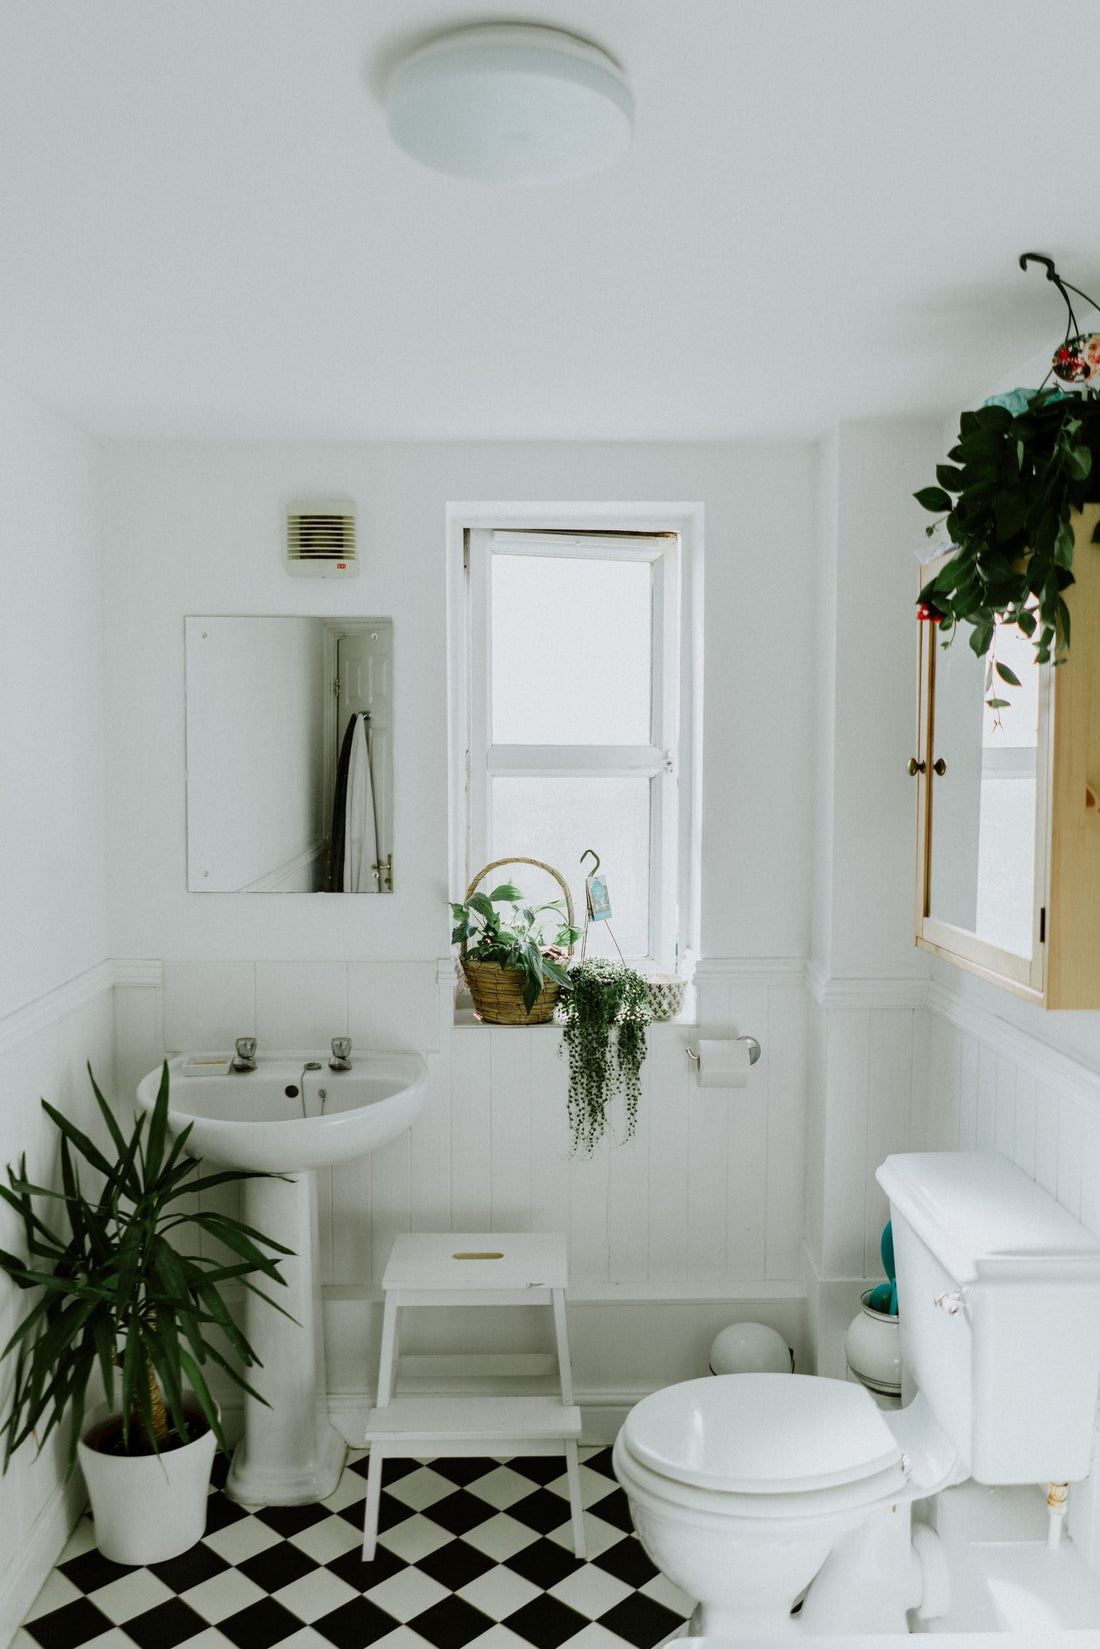 5 Easy Ways to Make Your Small Bathroom Feel Bigger